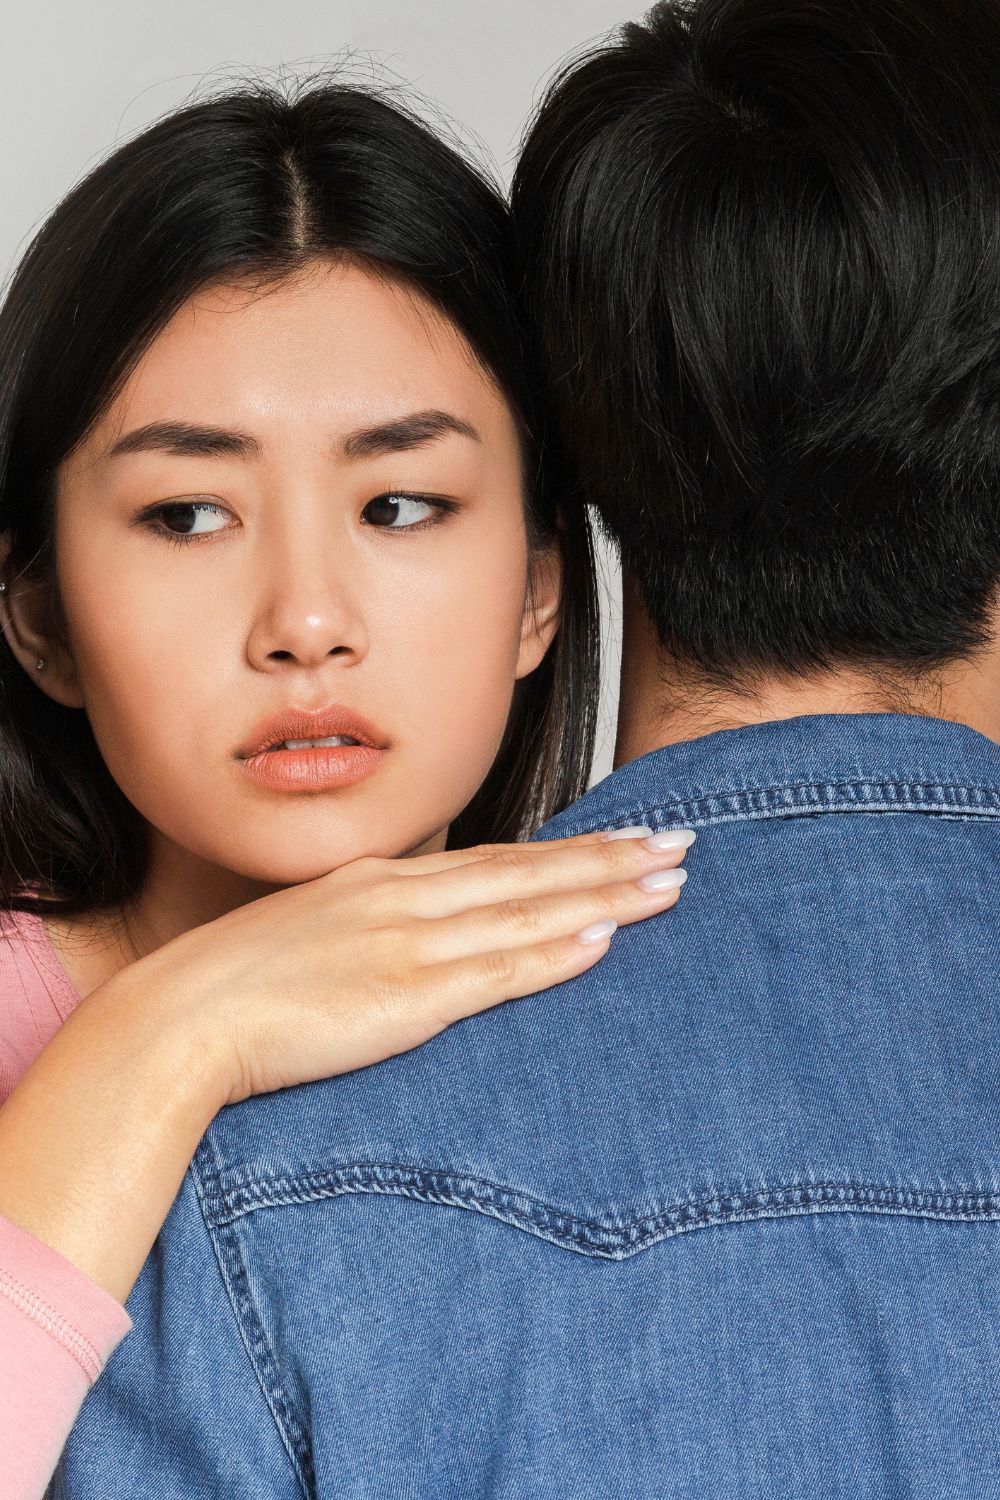 7 signs you are scared of your boyfriend